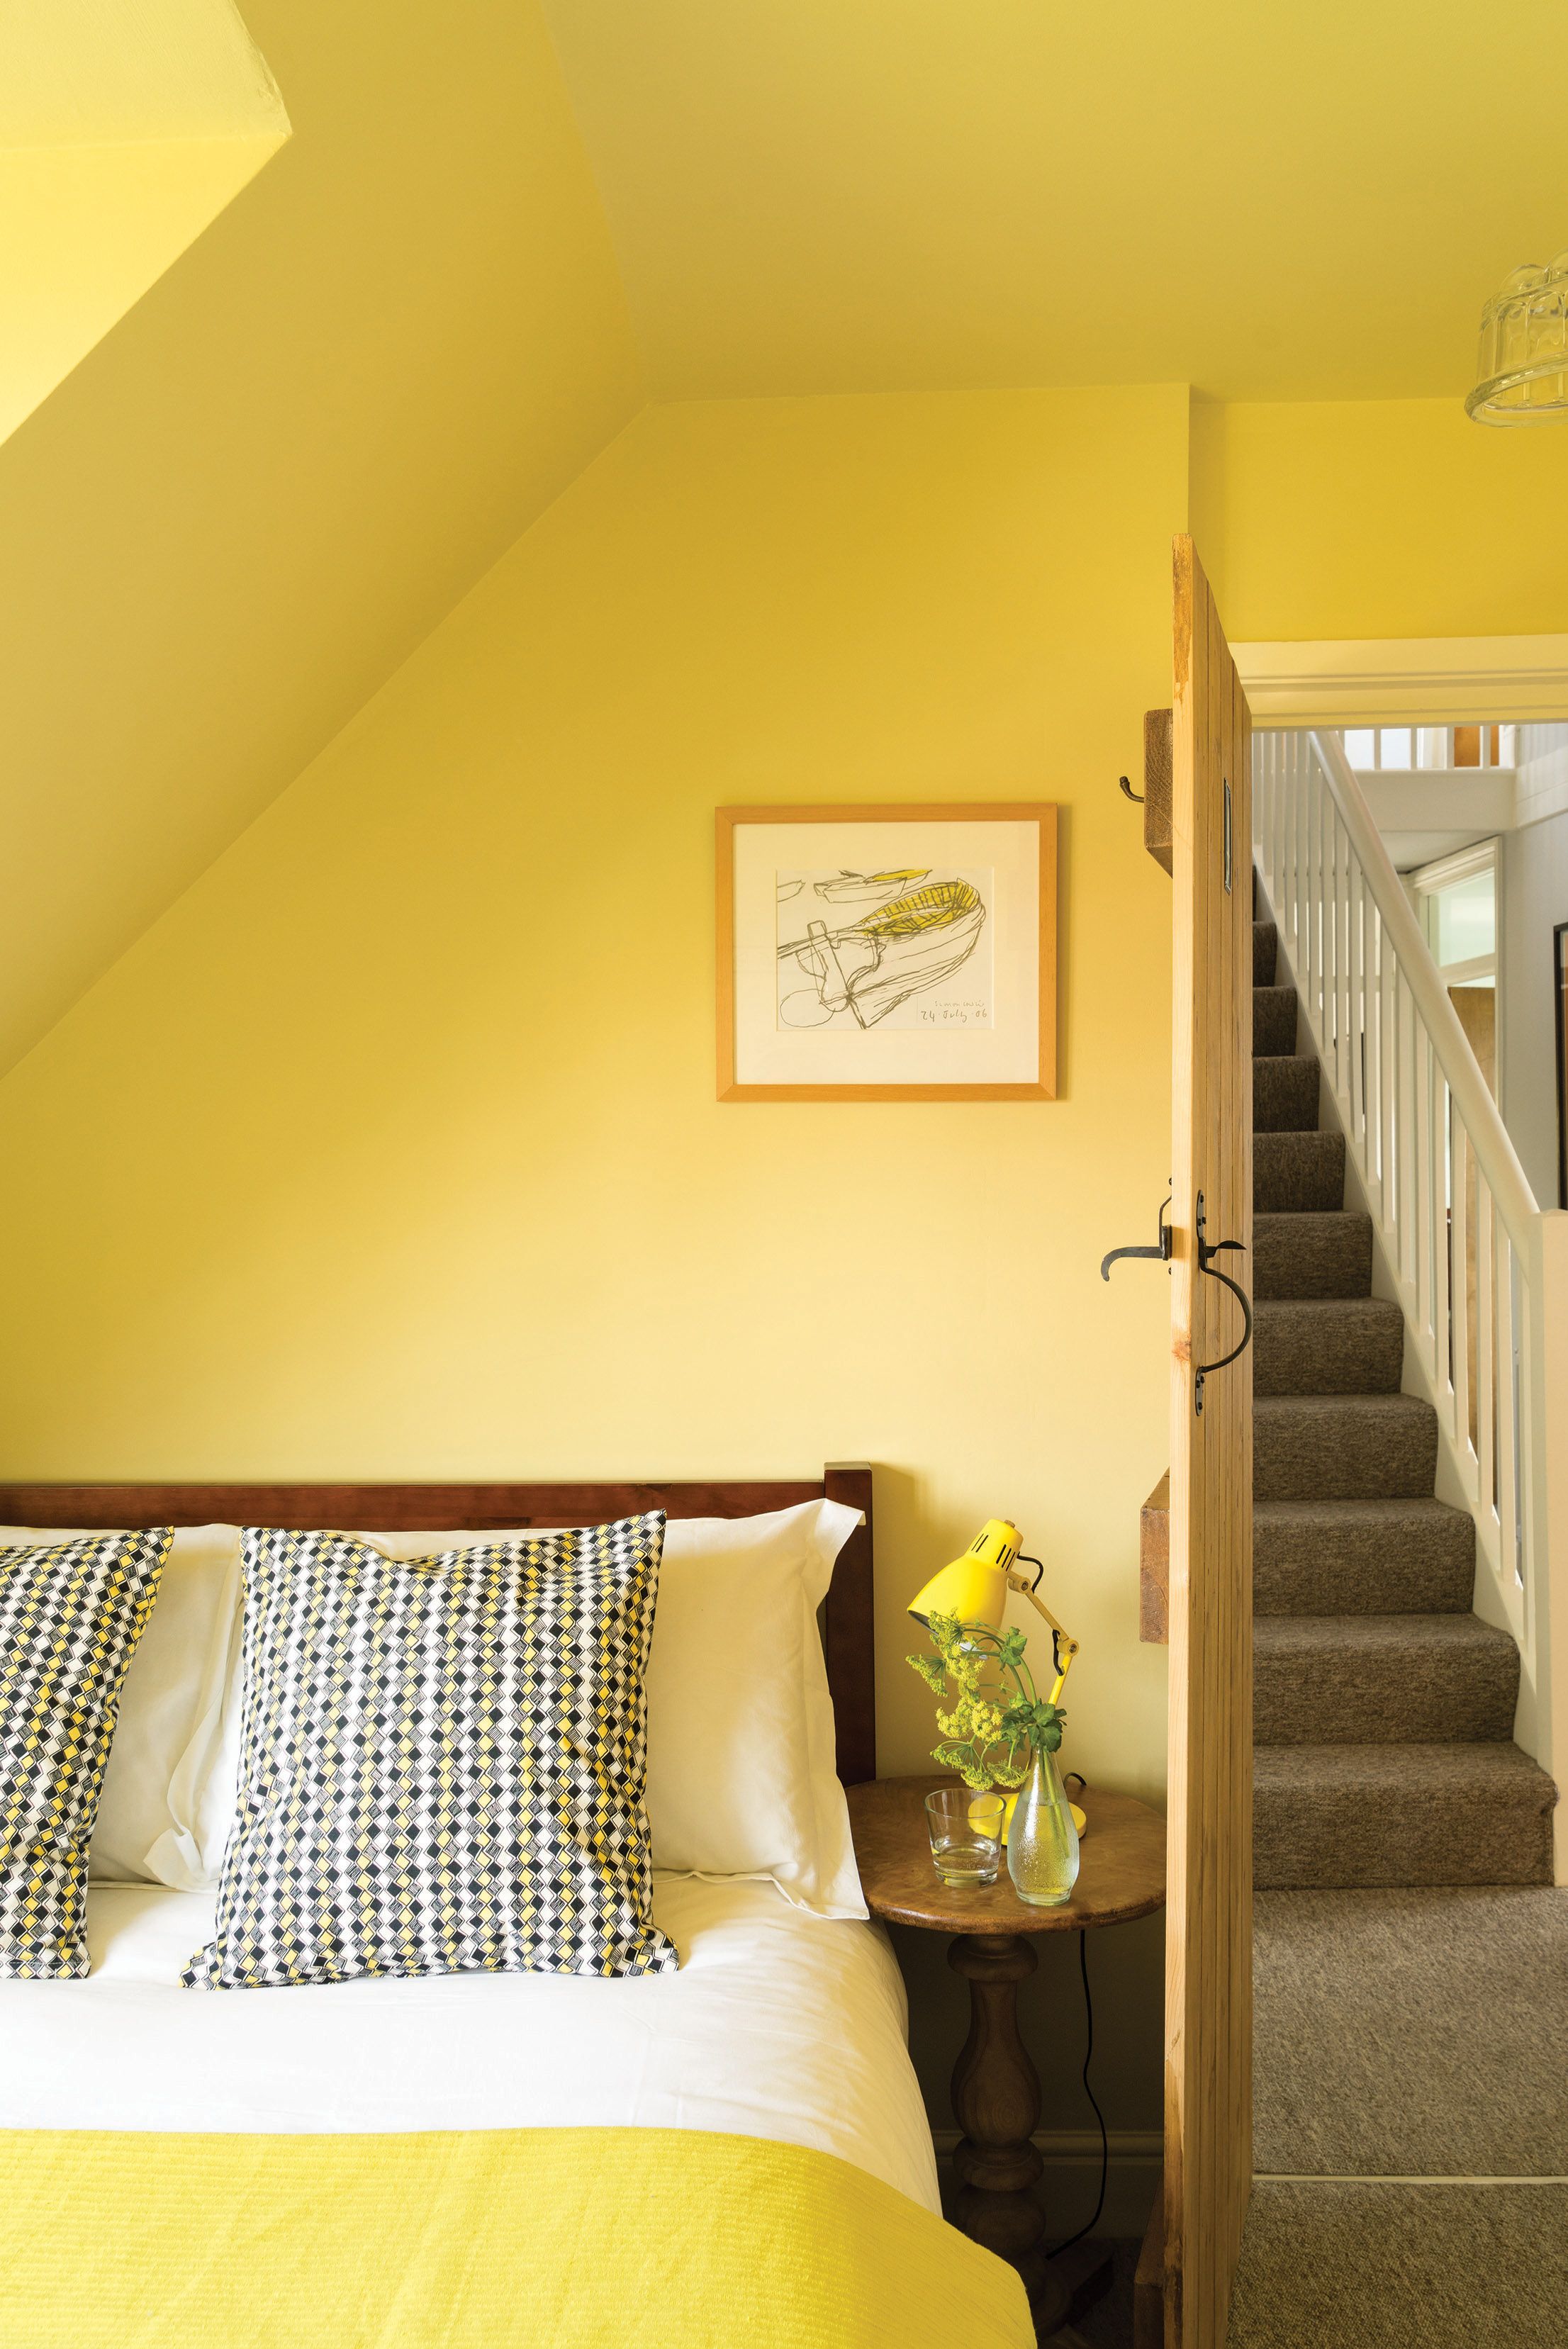 7 Yellow Bedroom Ideas To Brighten Your Space Just In Time For Spring